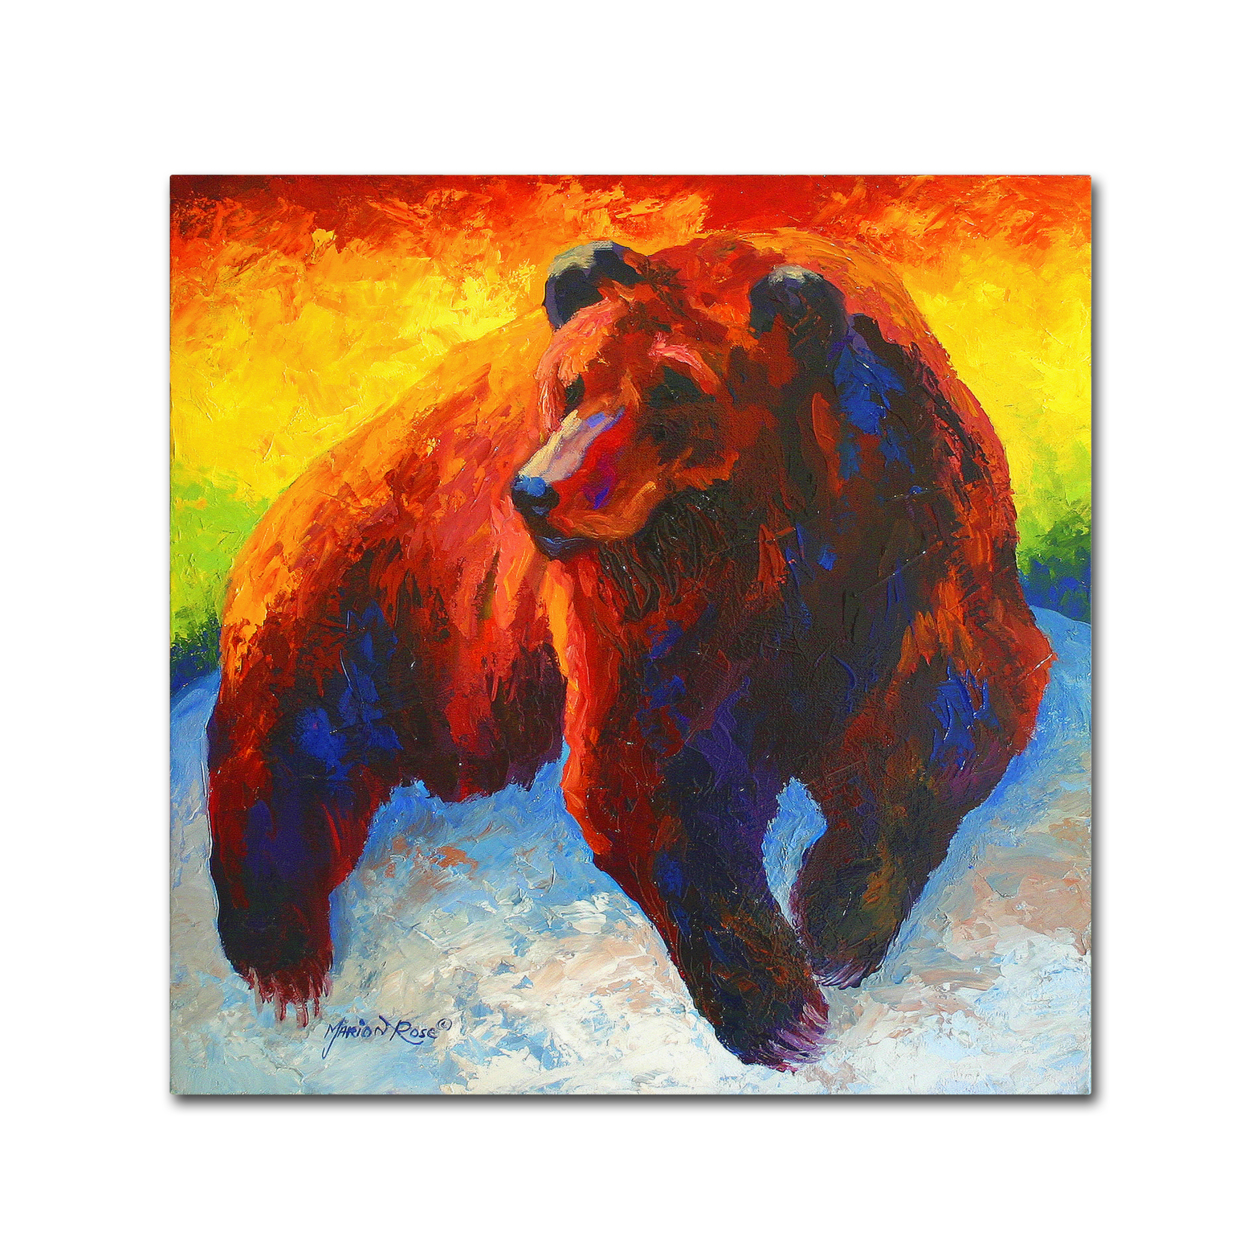 Marion Rose 'Lookout Grizz' Ready To Hang Canvas Art 24 X 24 Inches Made In USA